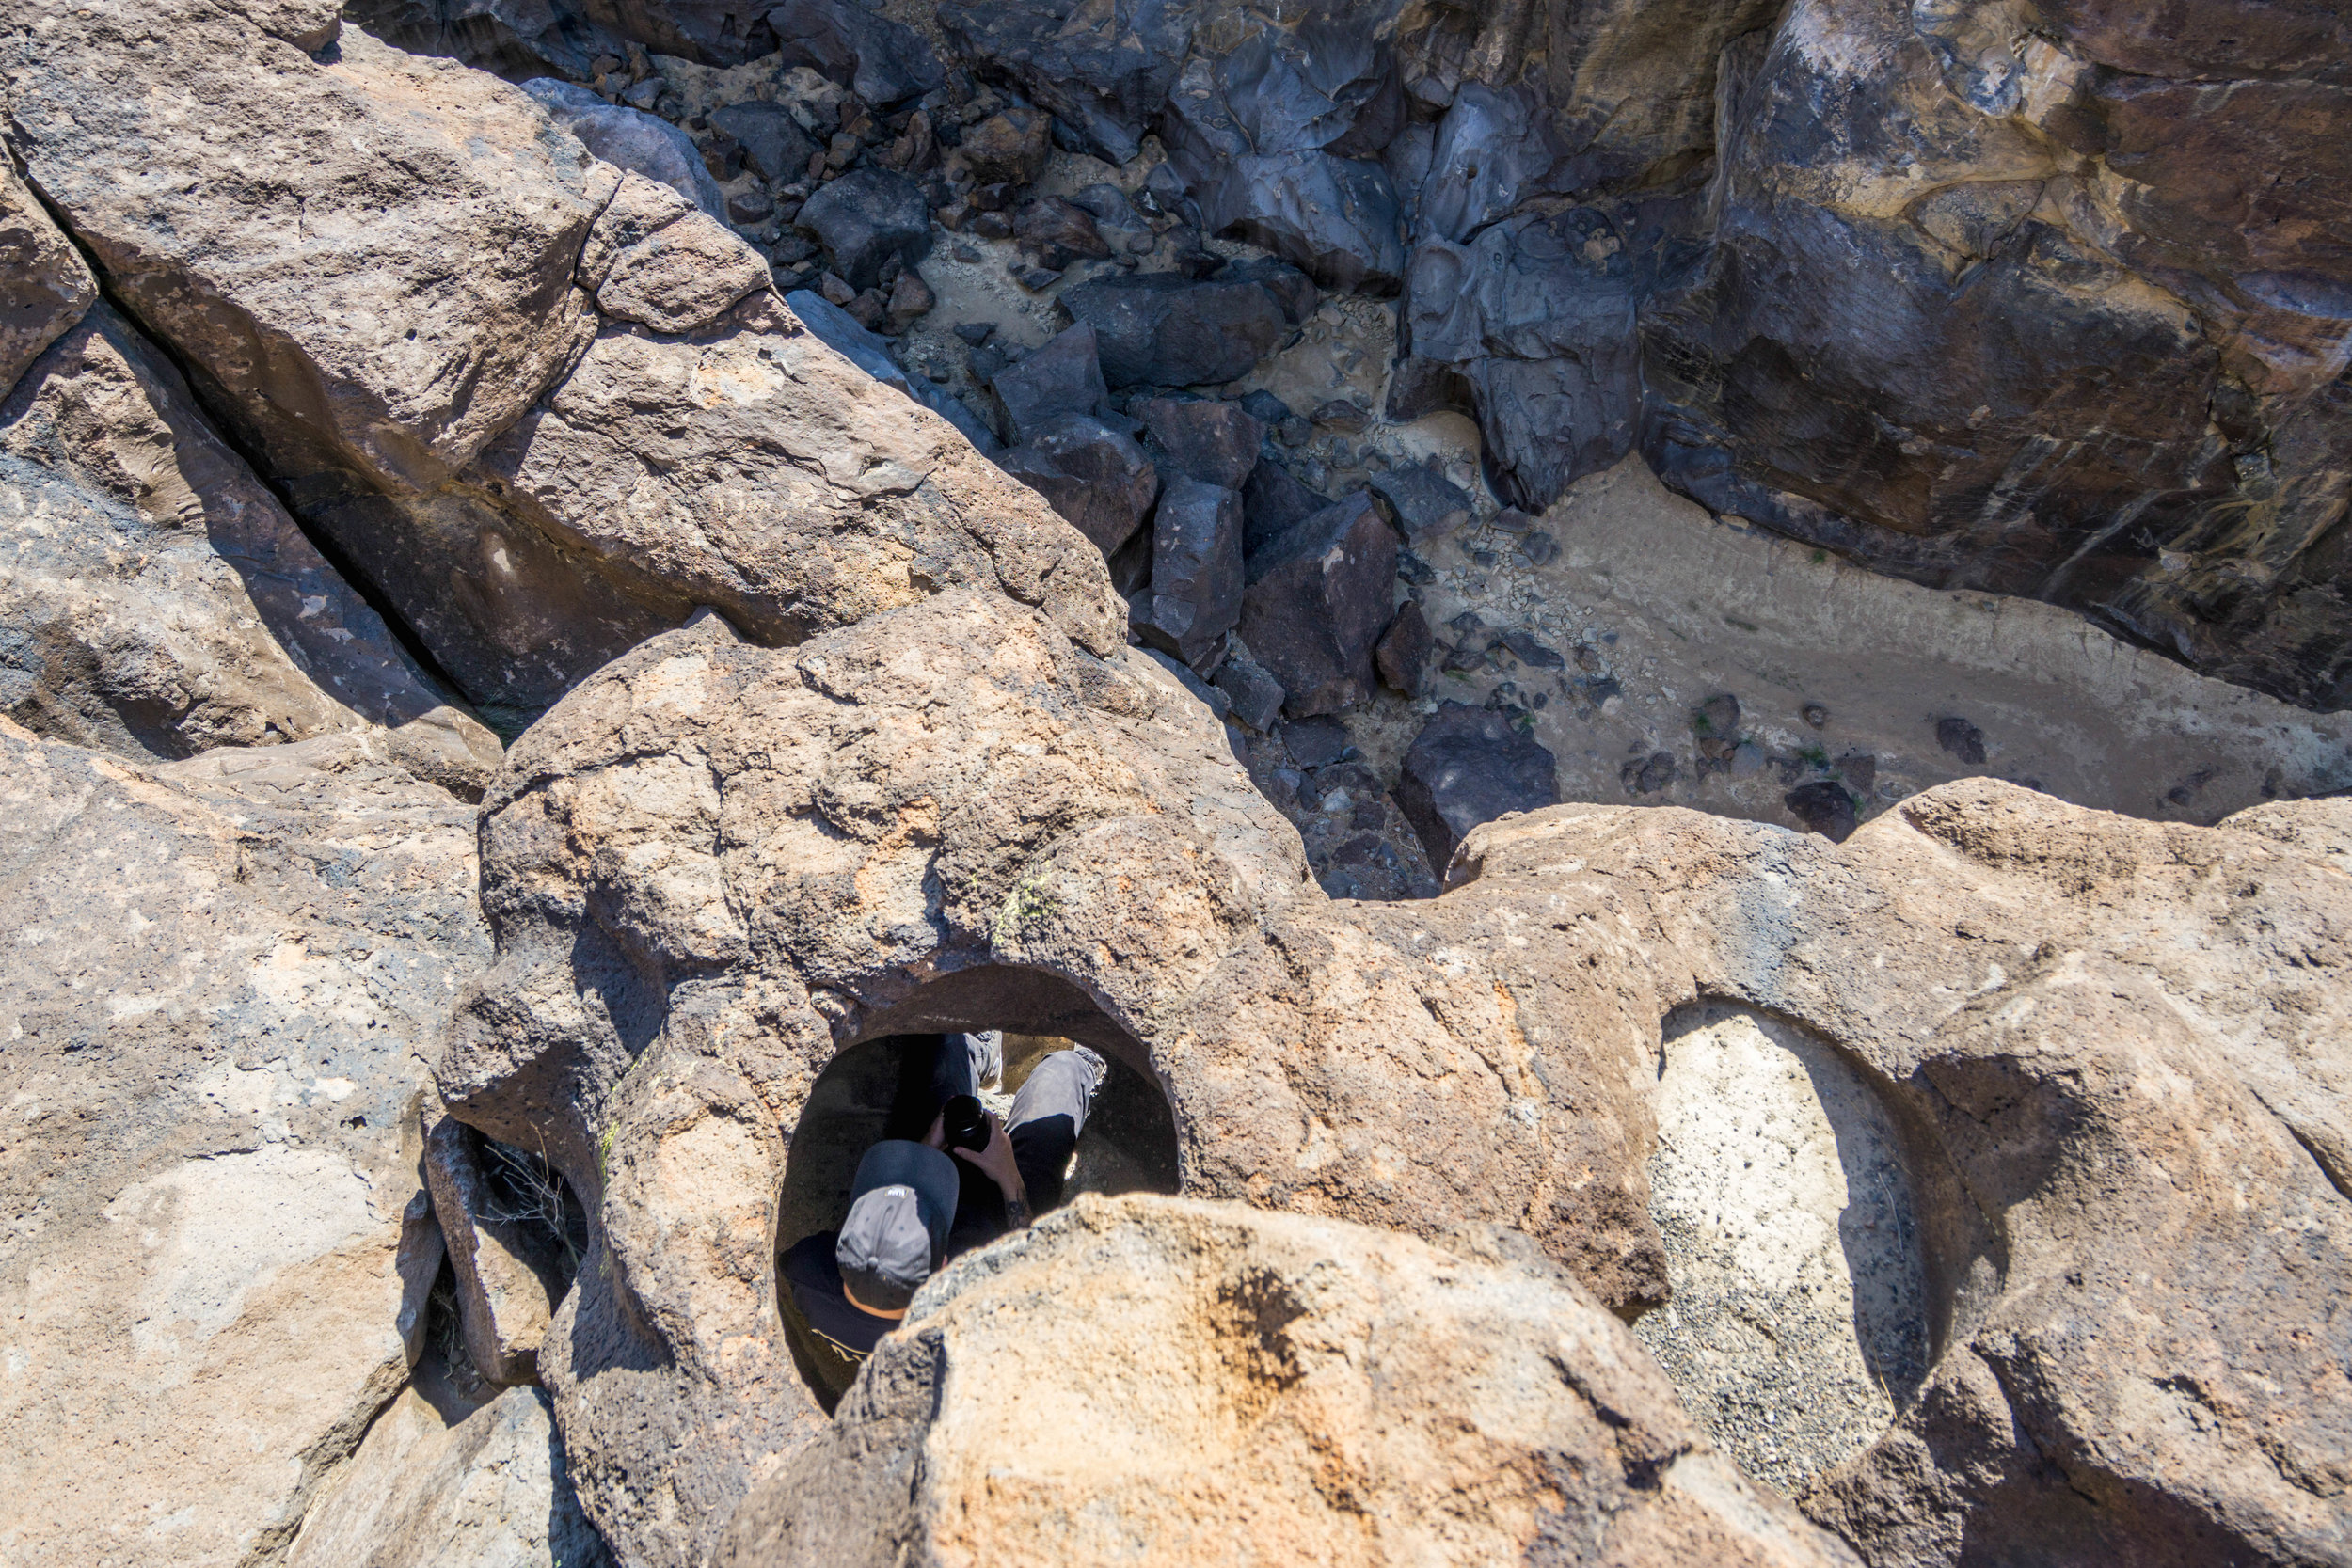 Perfect circles shaped by whirlpool-like water erosion created a fun opportunity to climb inside the rocky capsule.